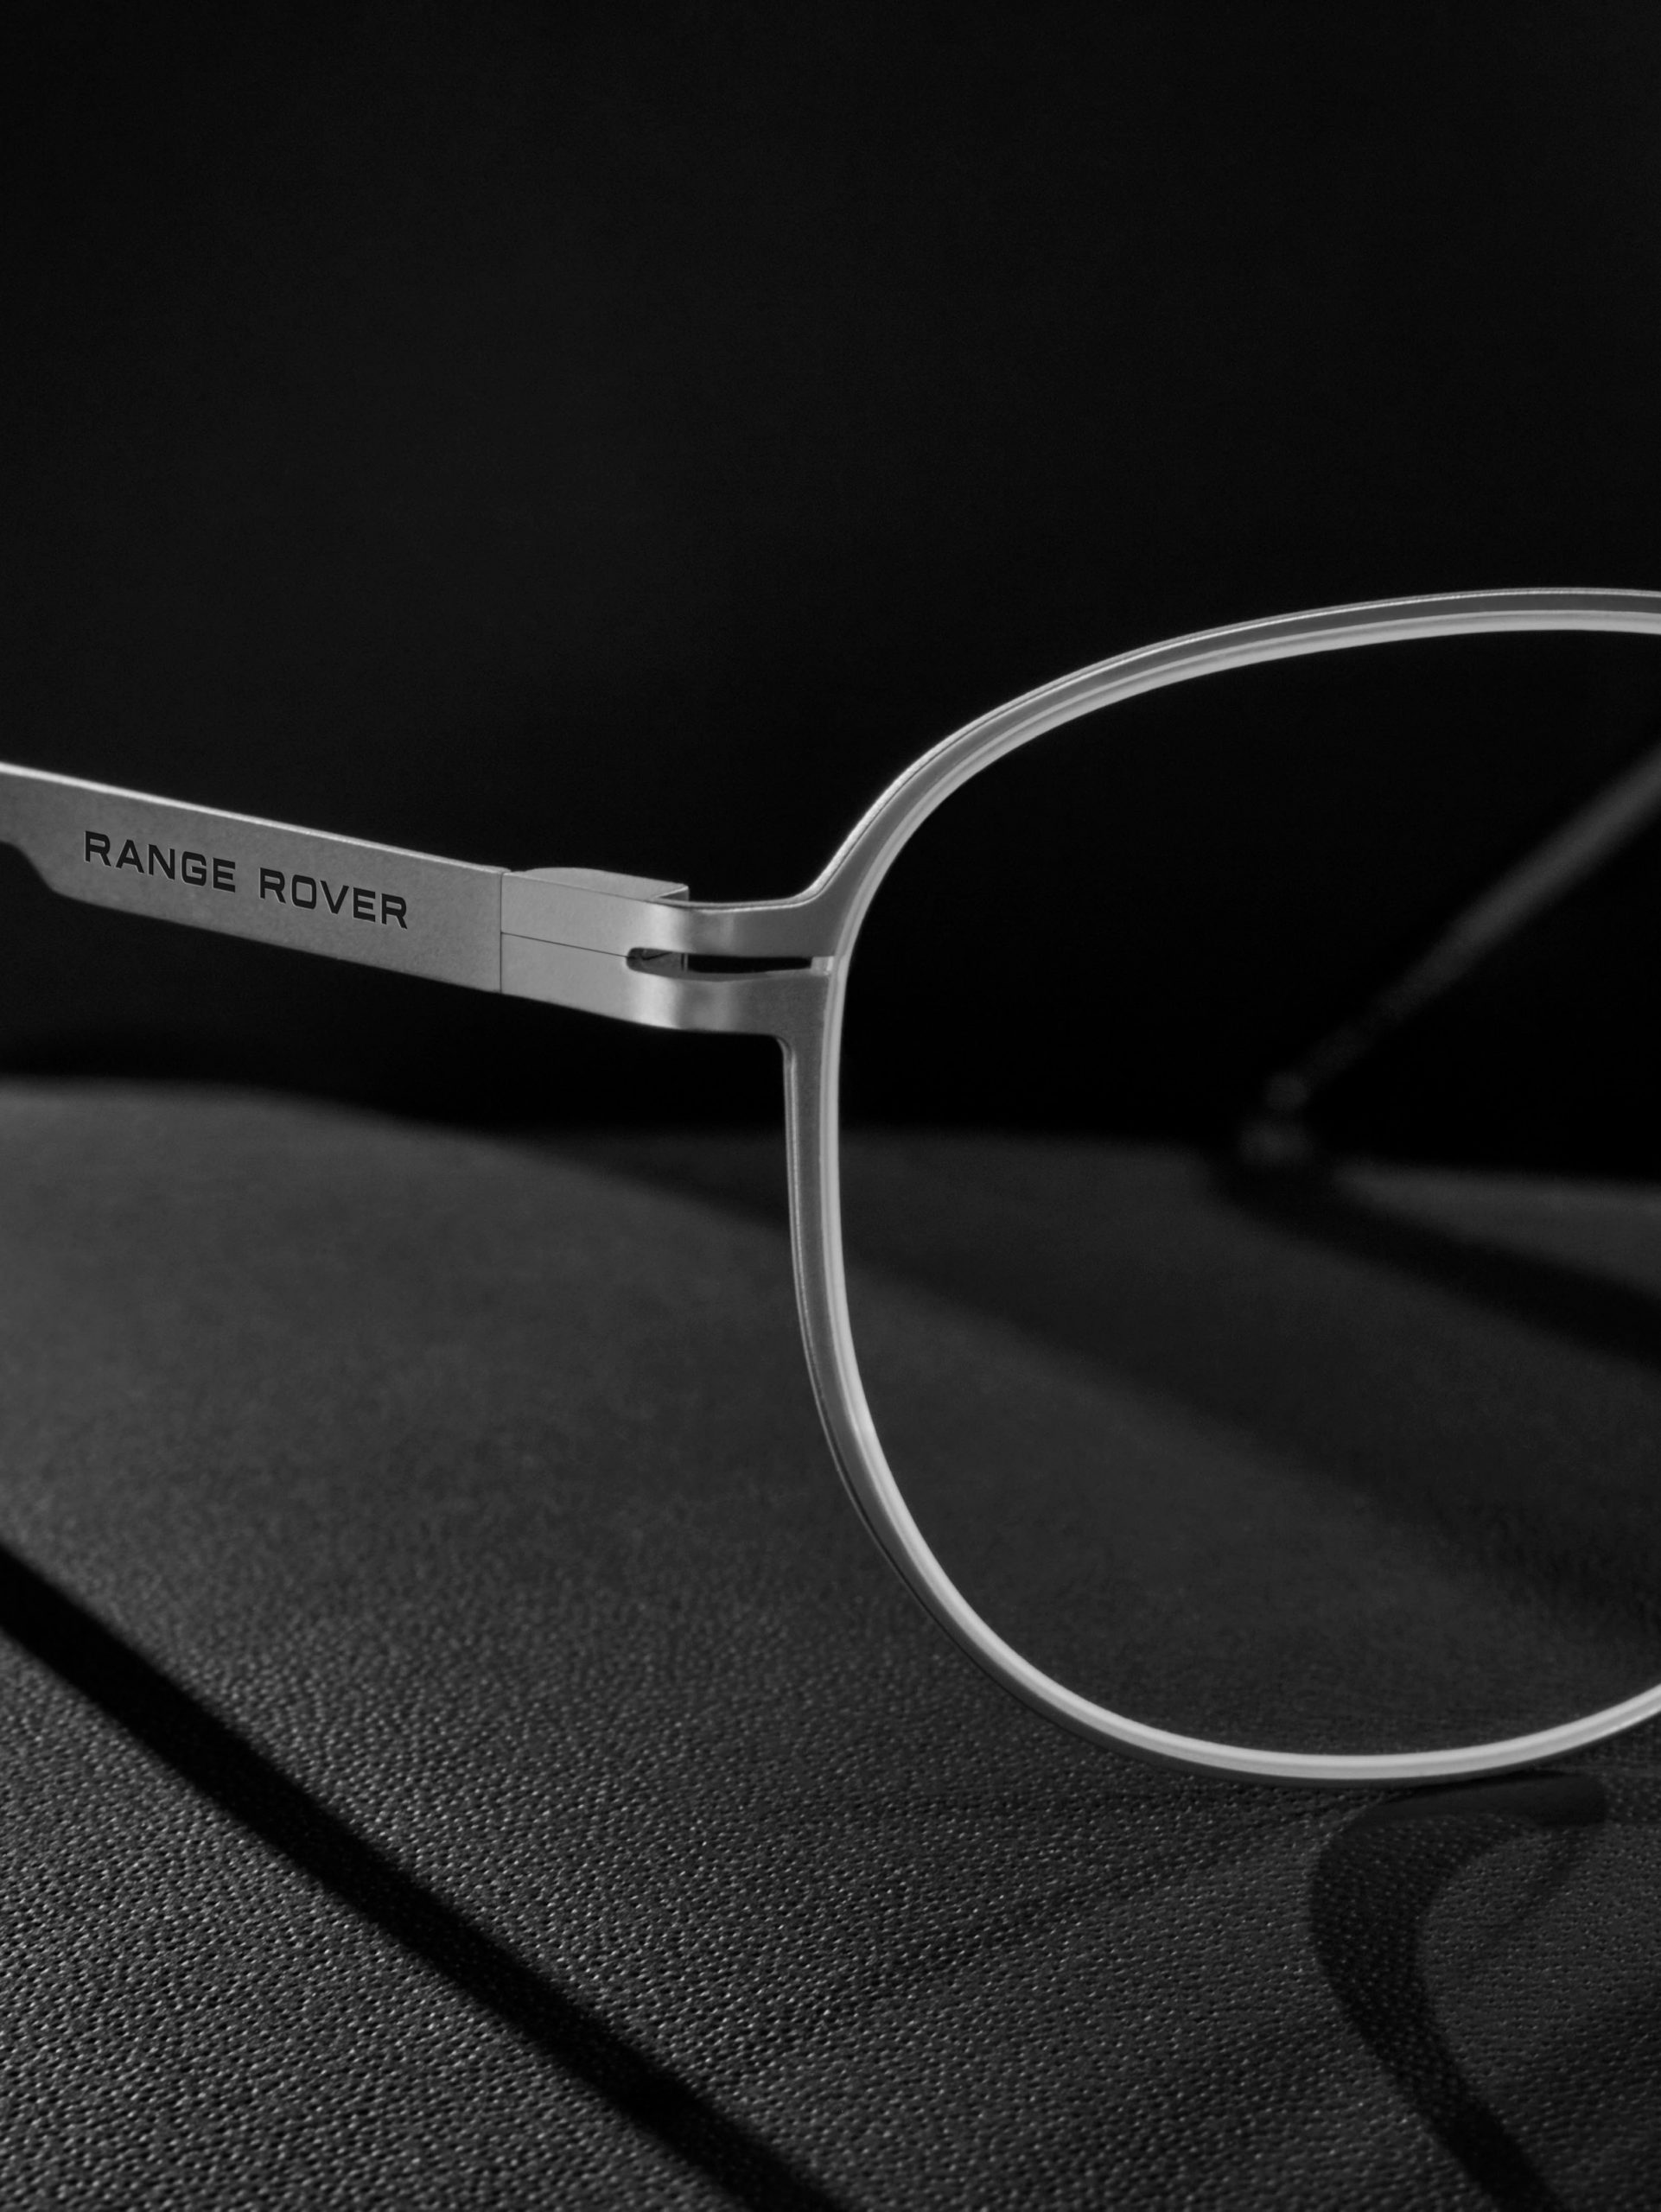 Introducing the Highly Anticipated Range Rover Optical Collection